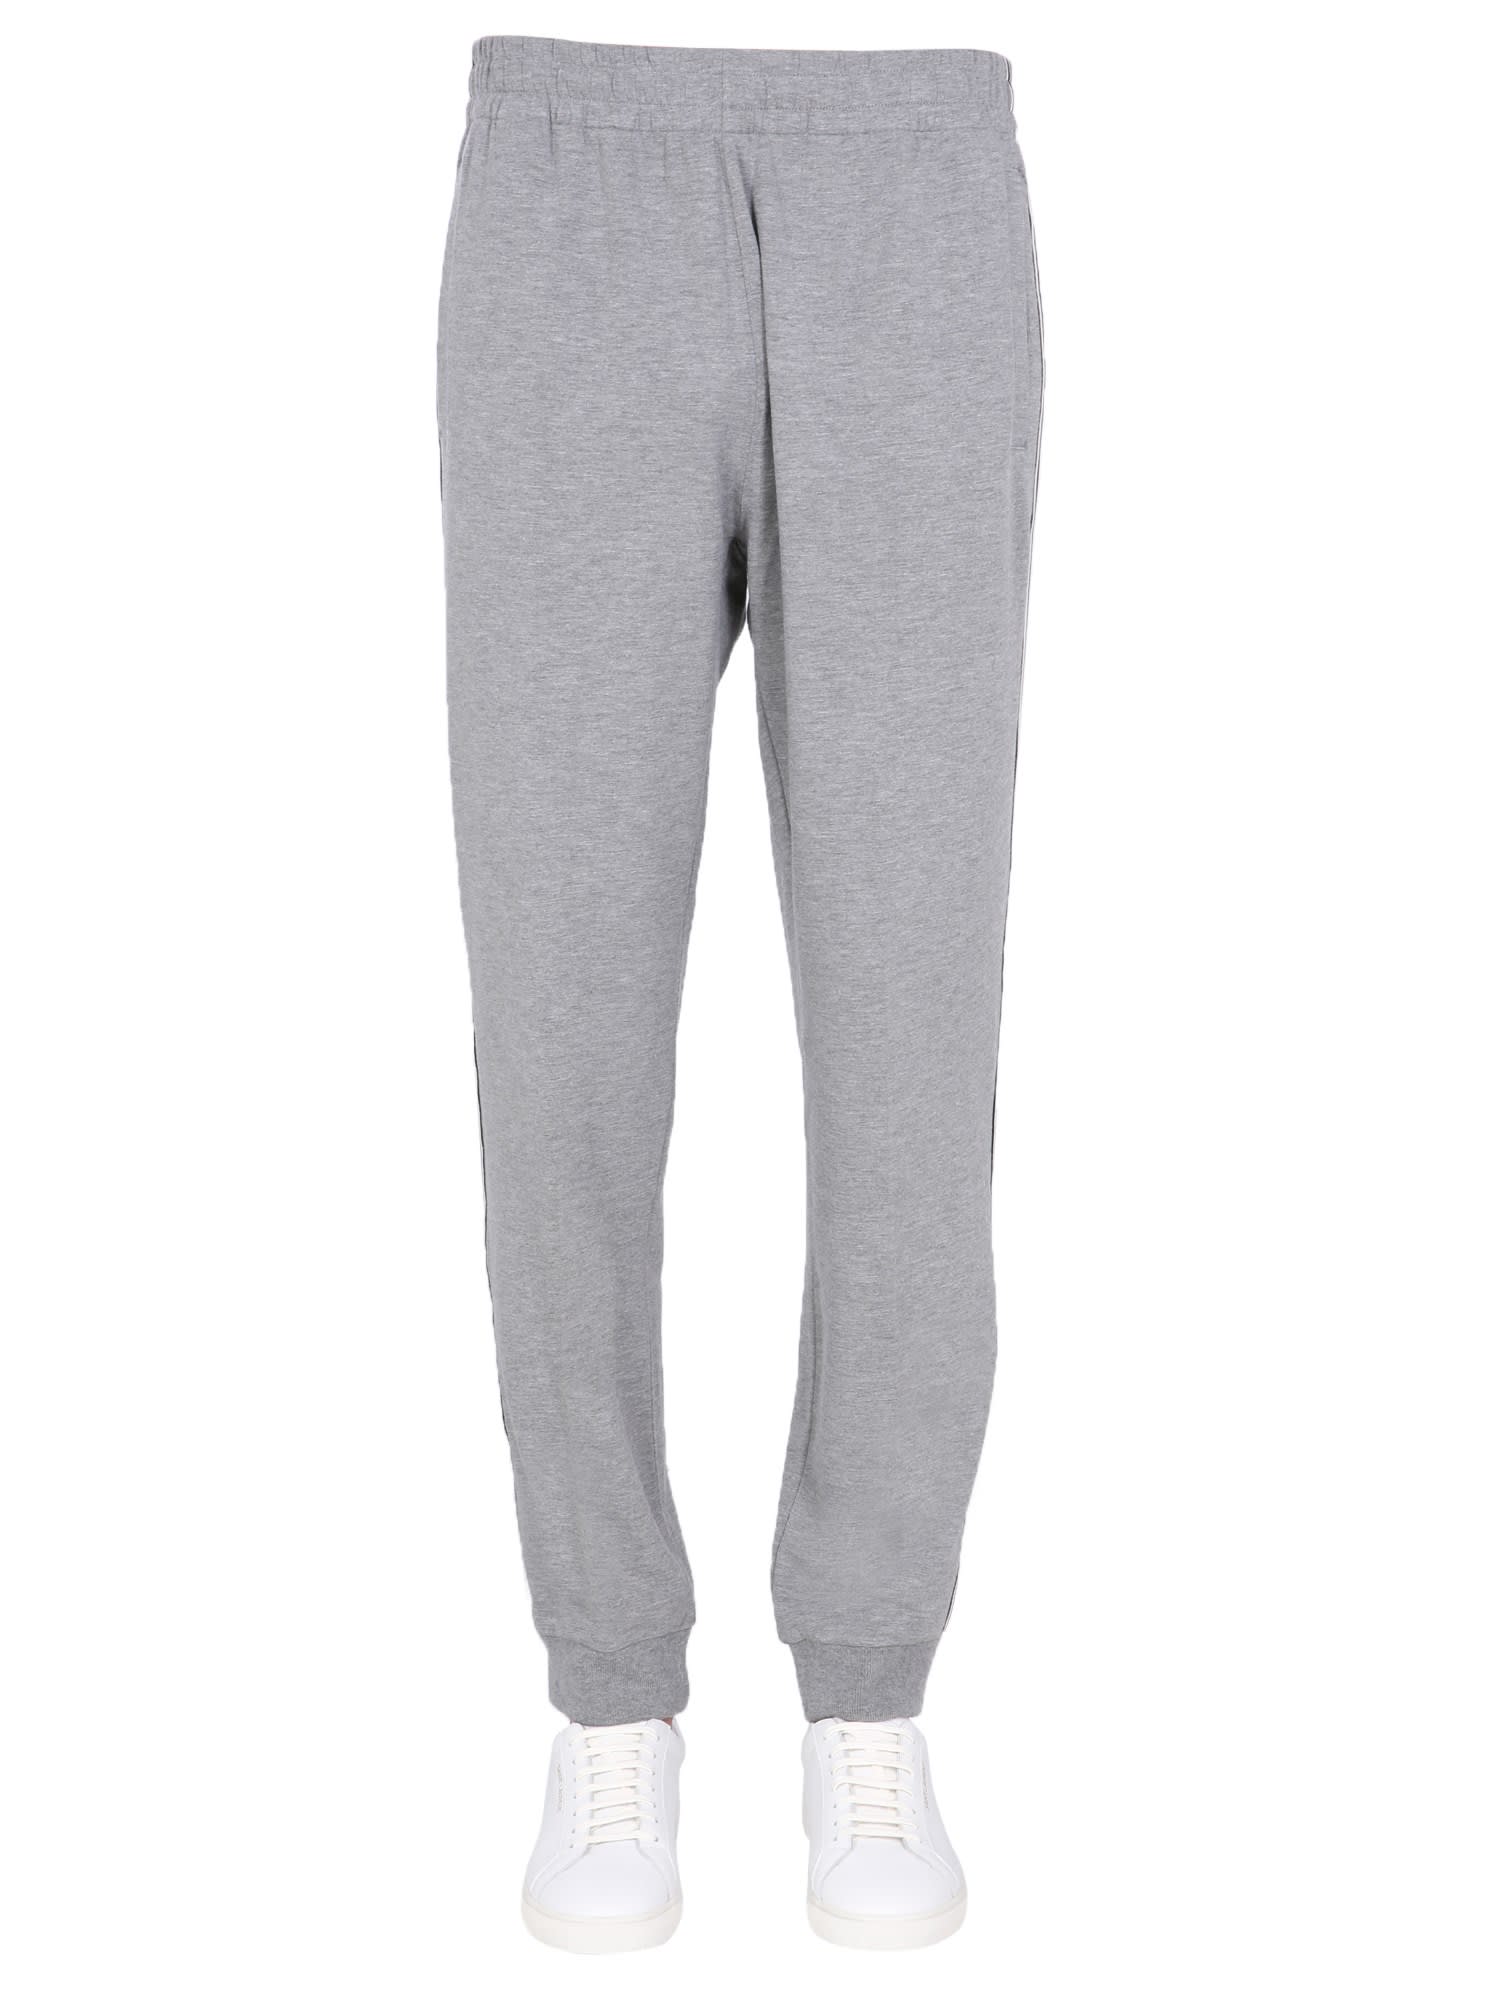 Z Zegna Jogging Pants With Contrasting Bands